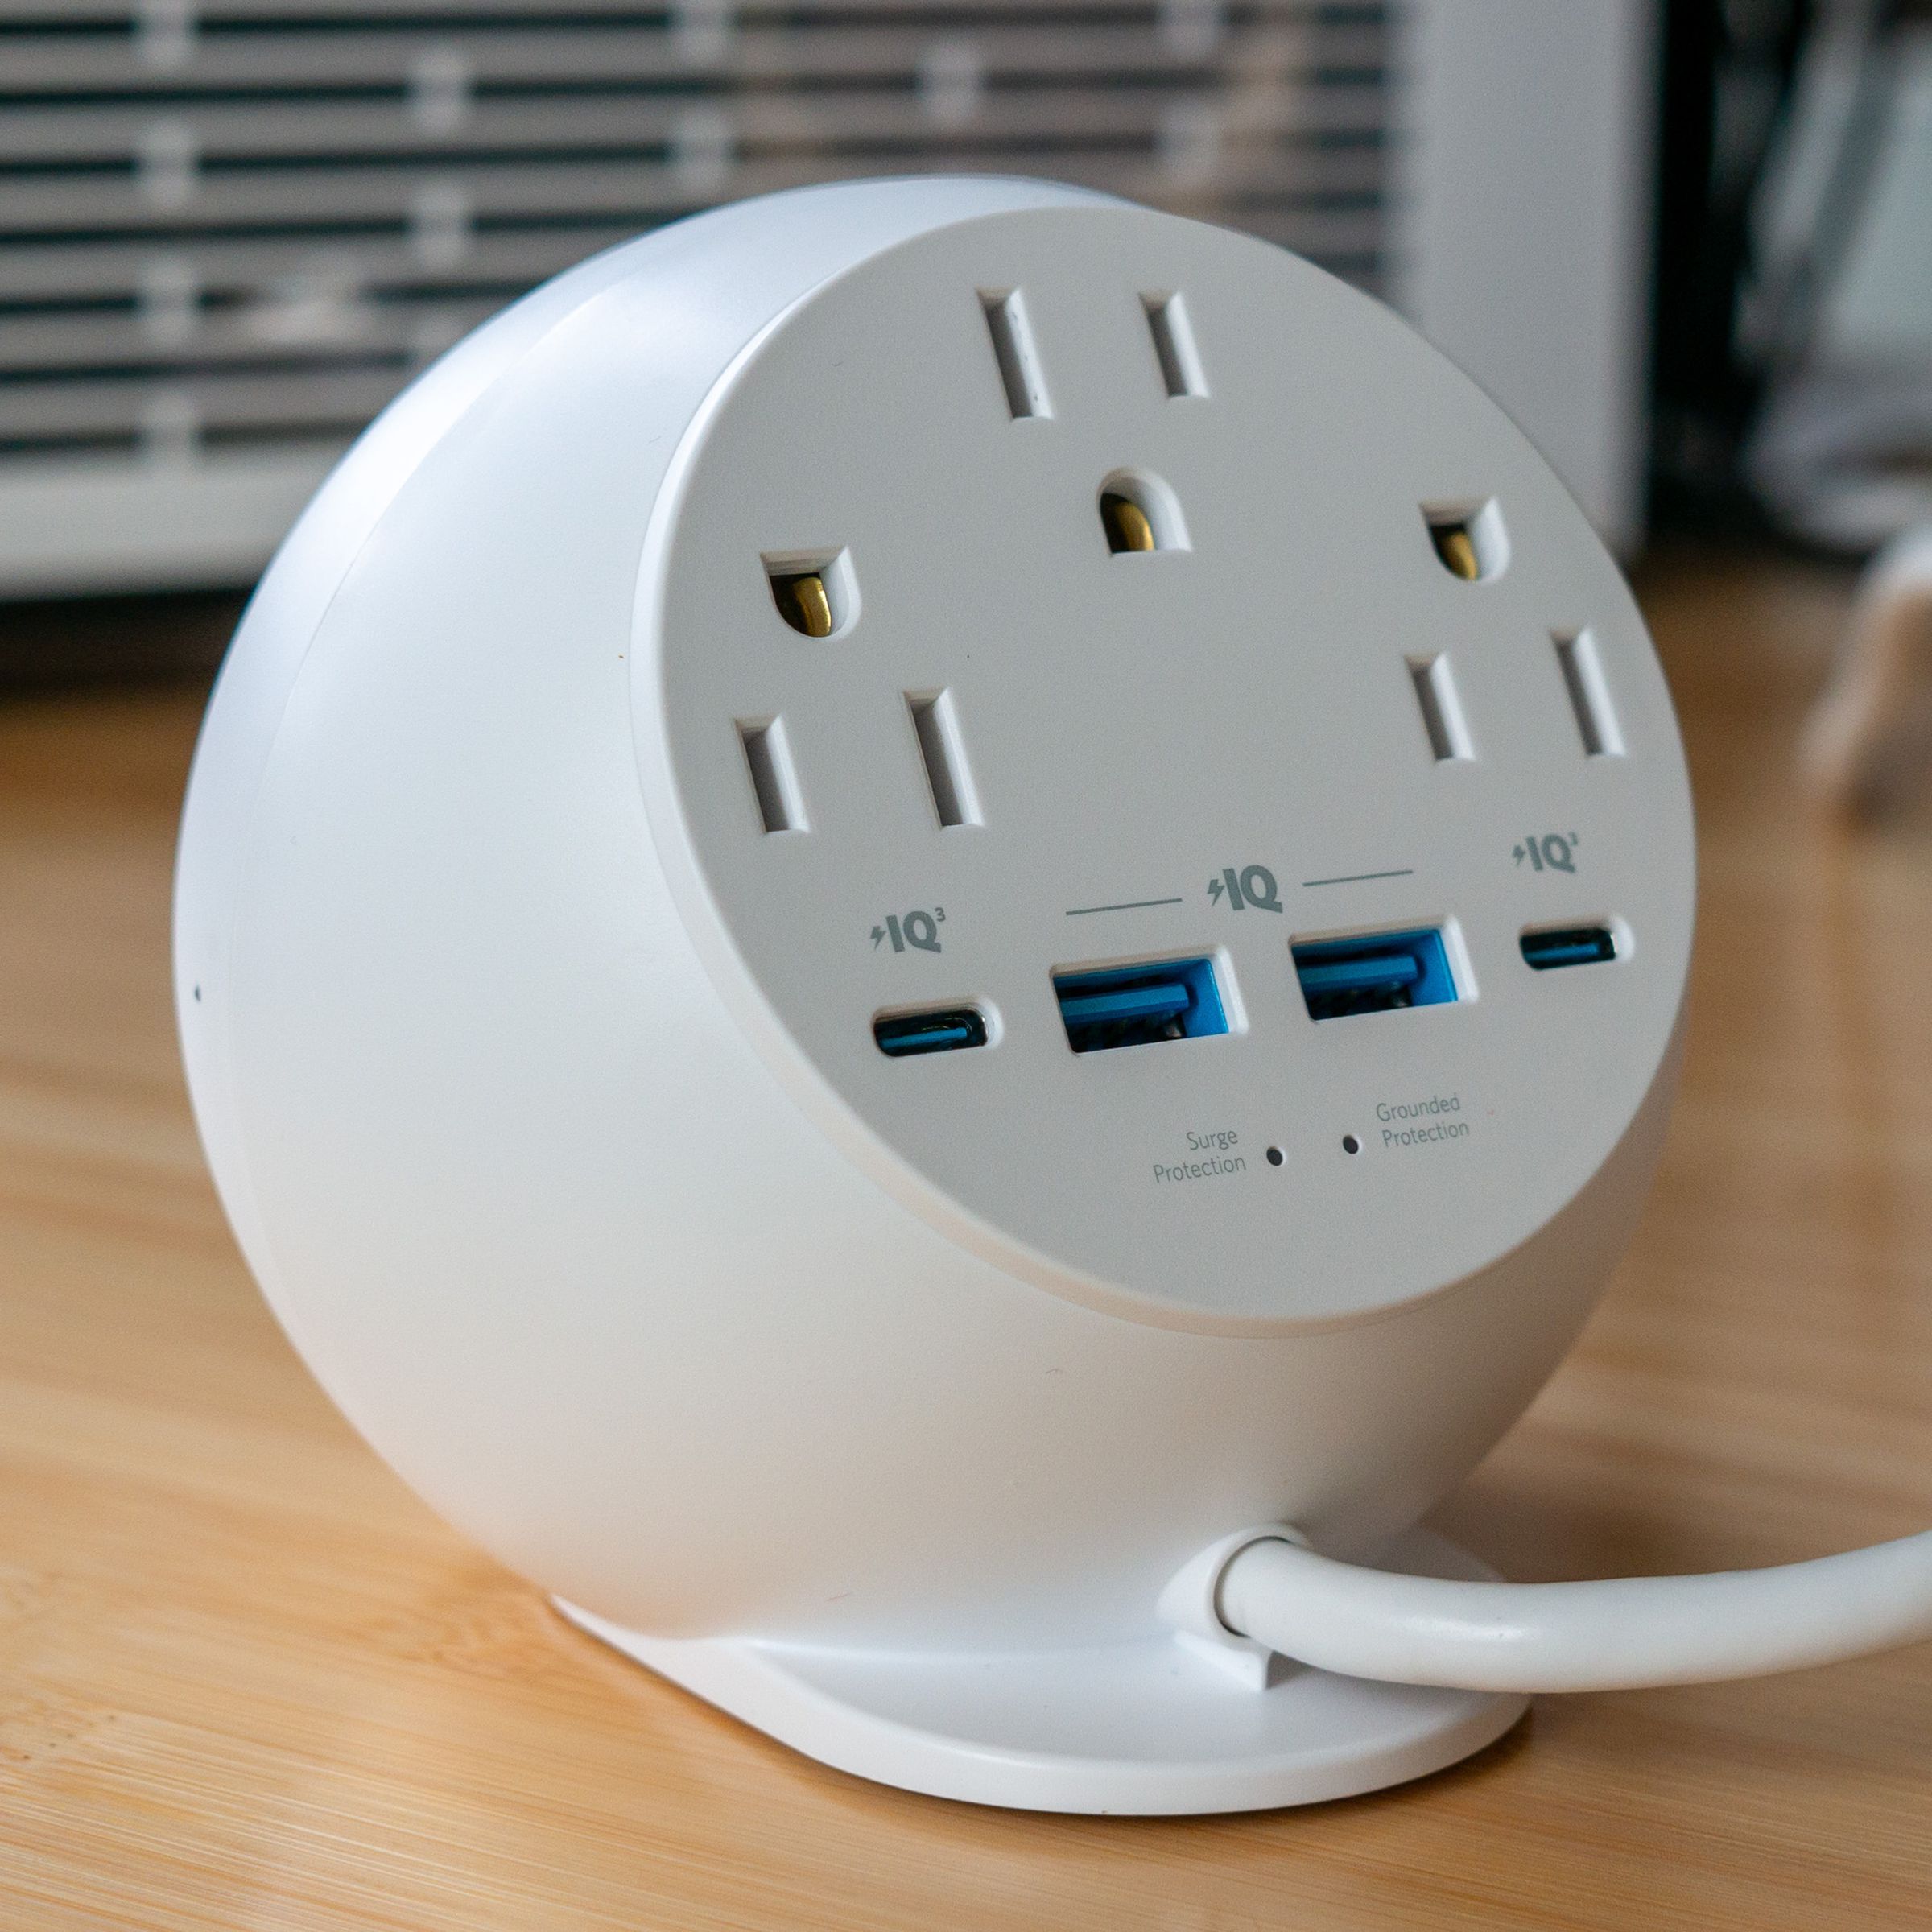 Rear view of the Anker 8-in-1 orb showing three AC outlets, two USB-A, and two USB-C ports.